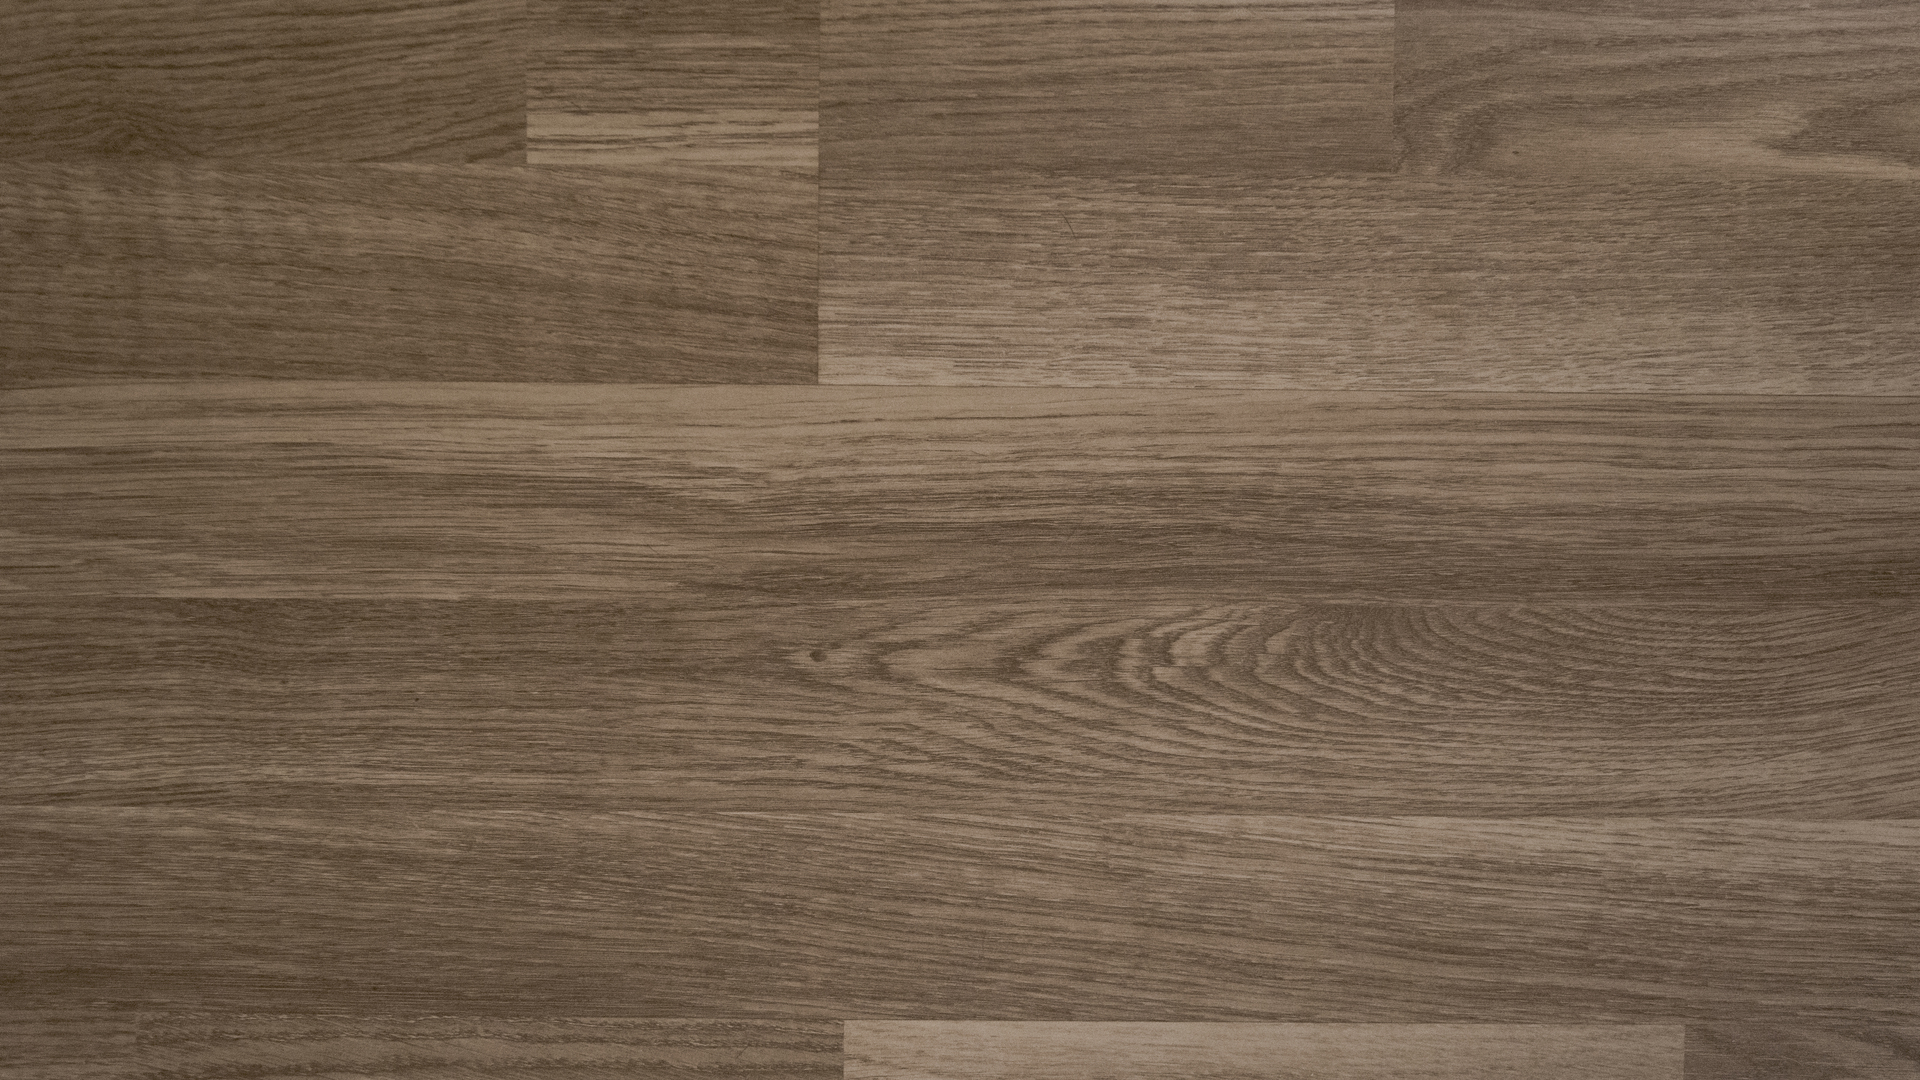 These Tips For Choosing Wood Flooring Suitable For Your Needs